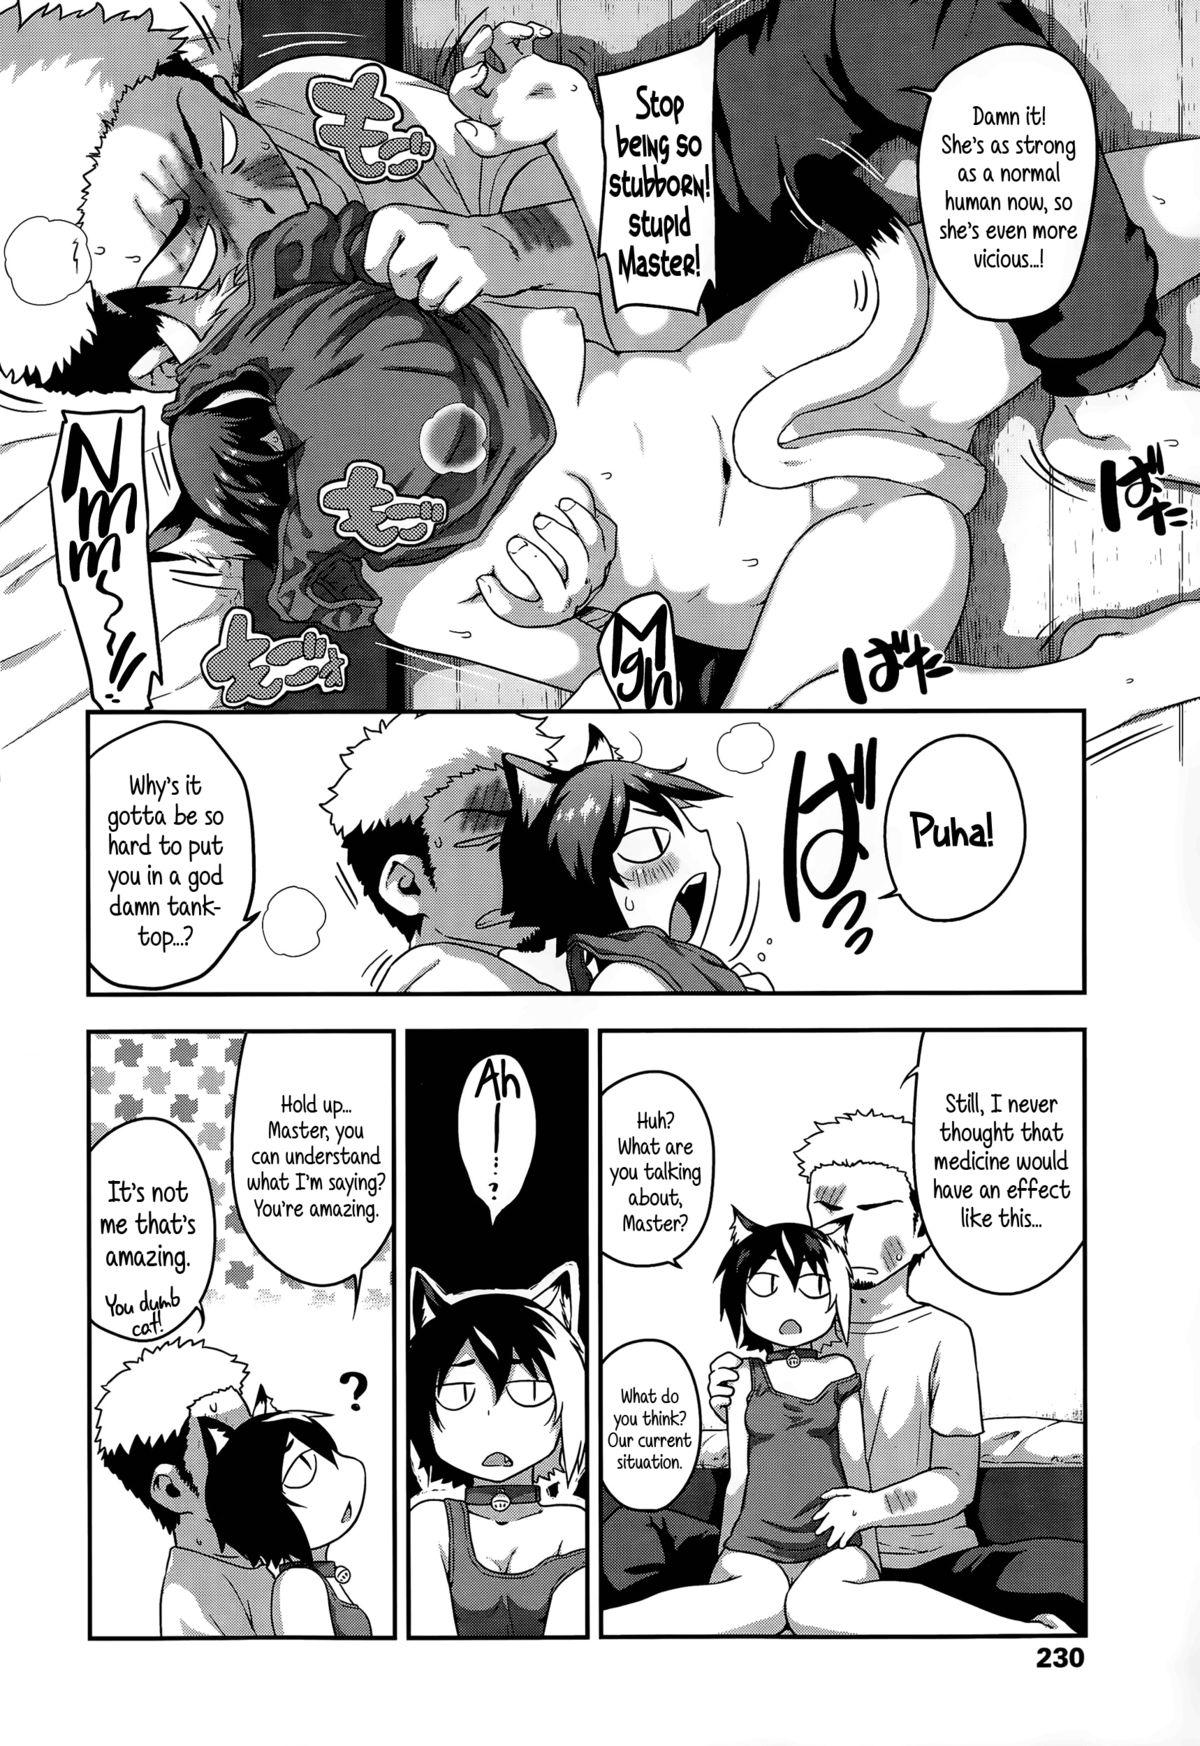 Massages What's Tsun Pussycat Gaydudes - Page 4